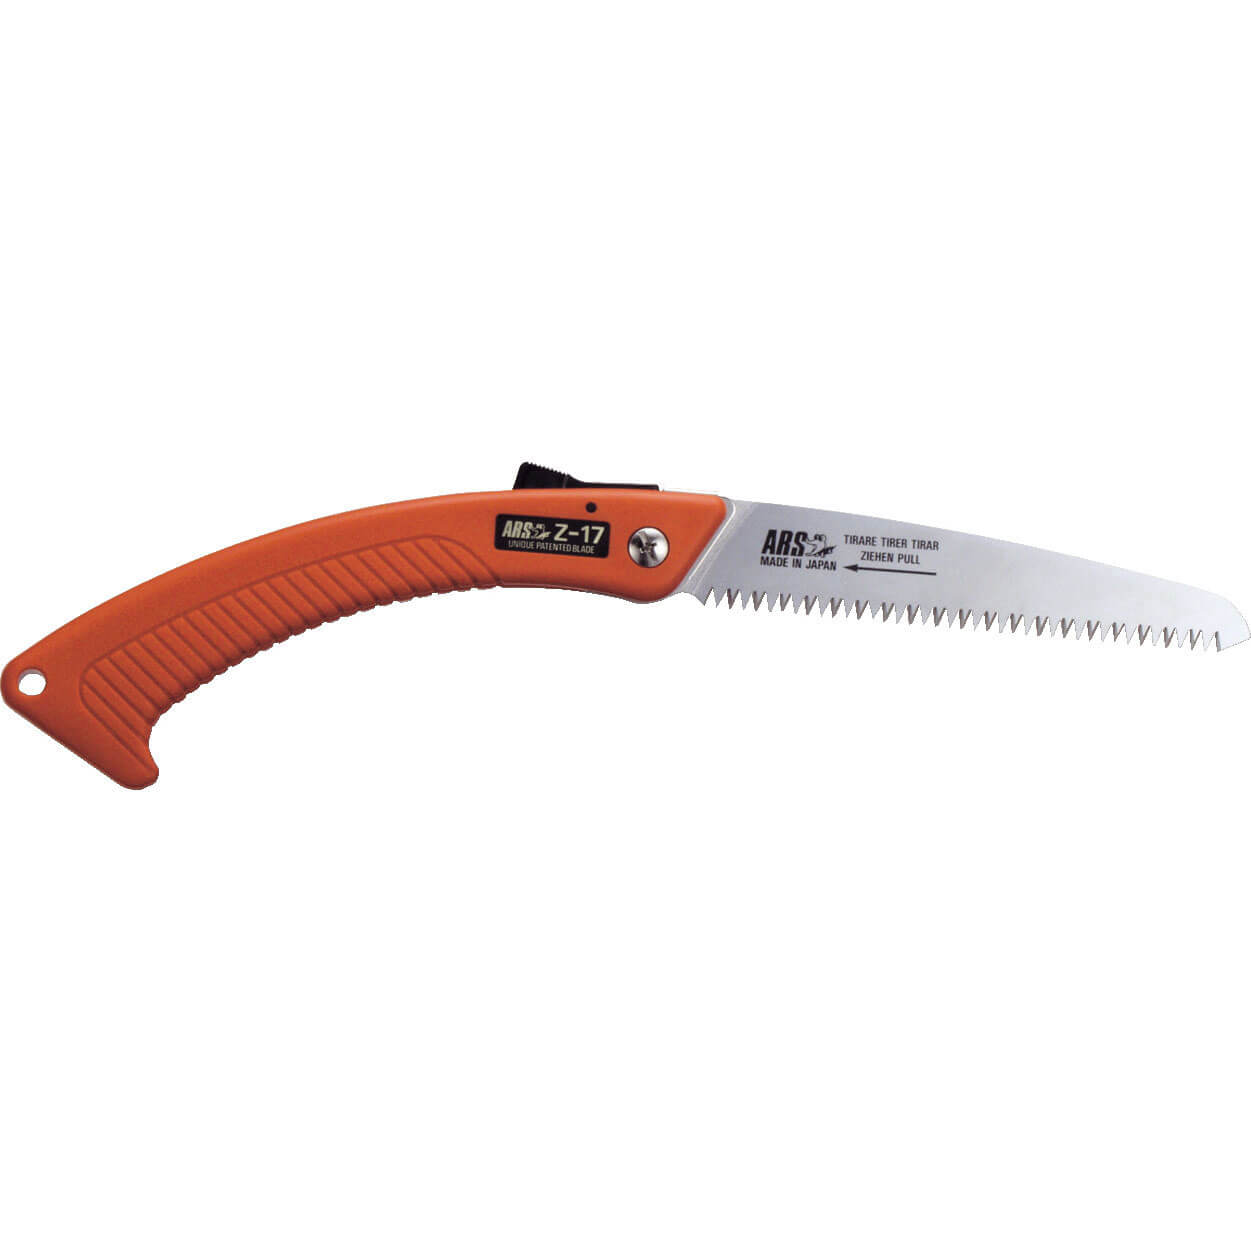 Image of ARS Z-17 Folding Pruning Saw Turbocut Straight Blade 380mm